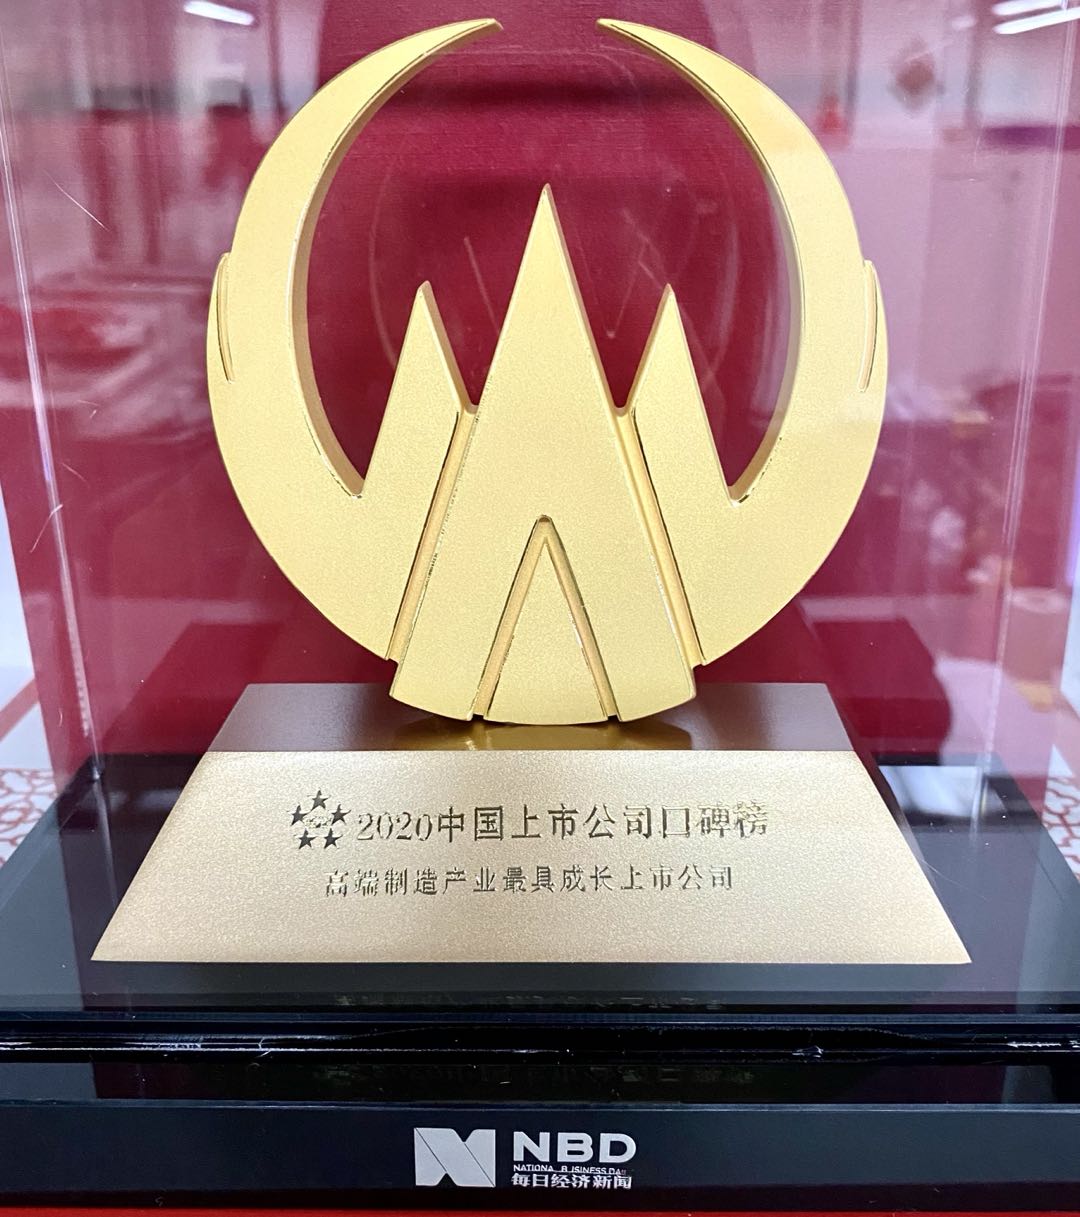 Honor won the "2020 9th China Listed Company Word of Mouth List - The Most Growing Listed Company in High-end Manufacturing Industry" award.